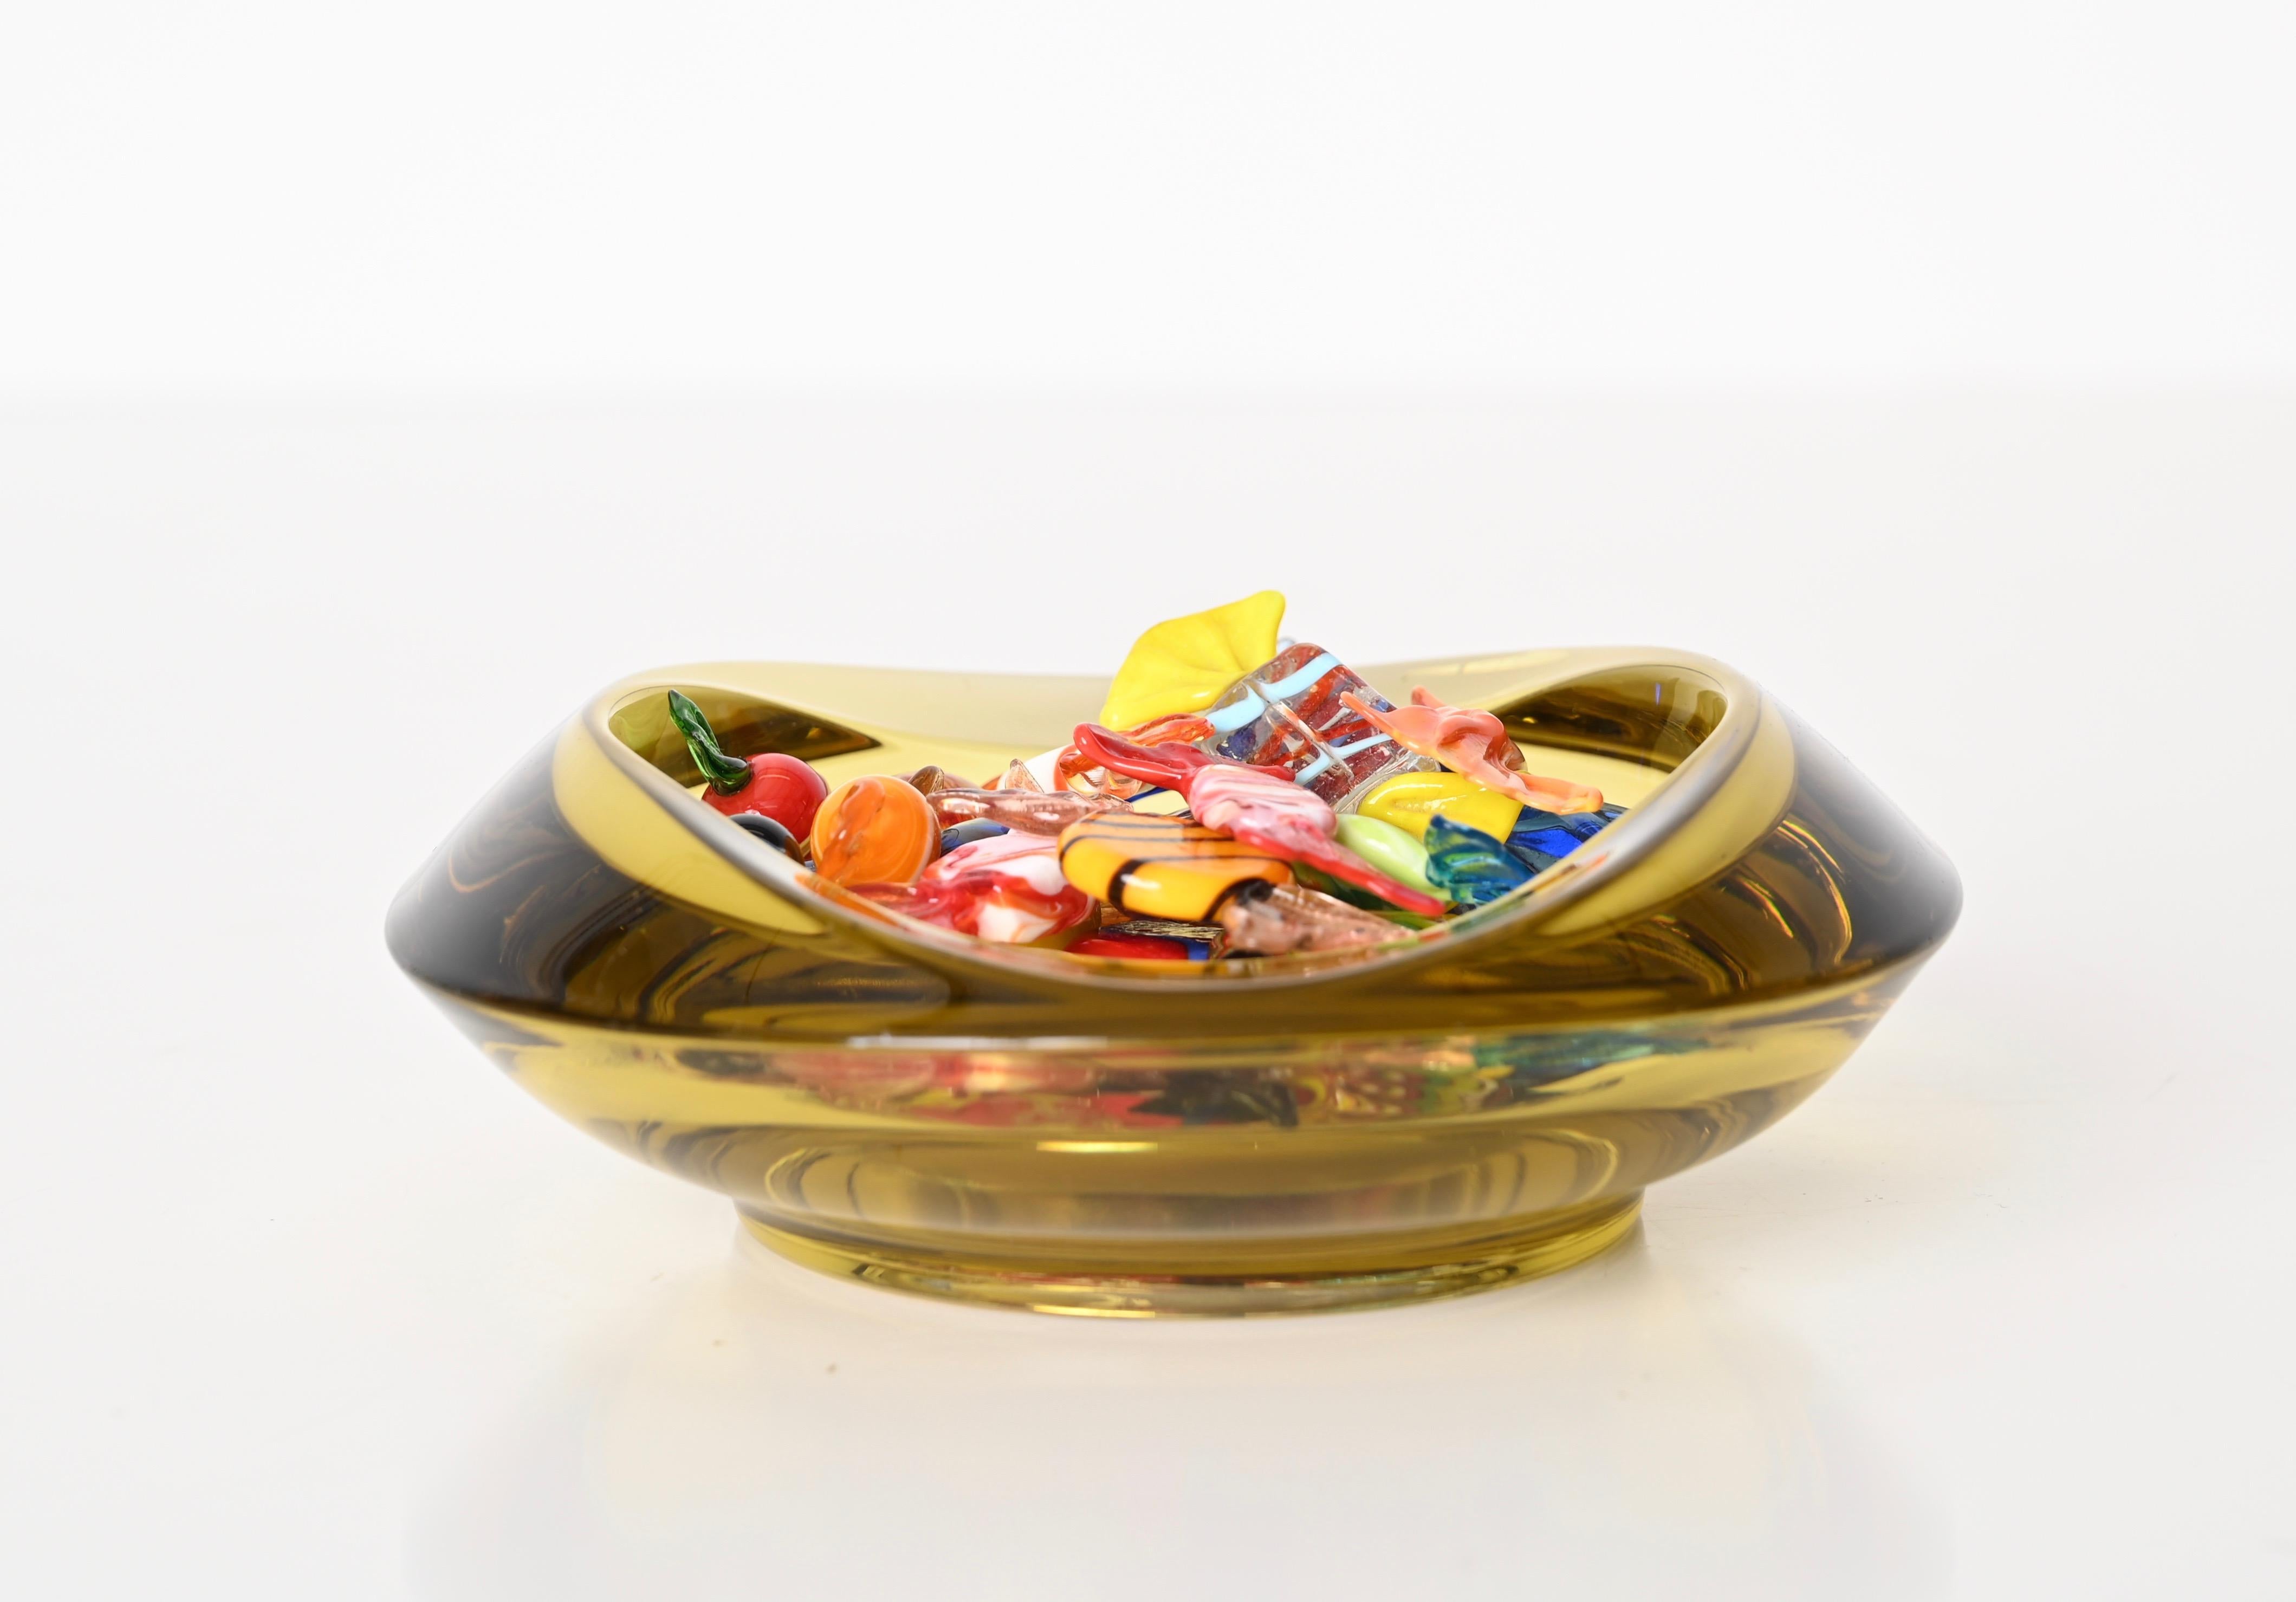 Beautiful bowl or ashtray made in a spectacular ambered yellow Murano glass using the 